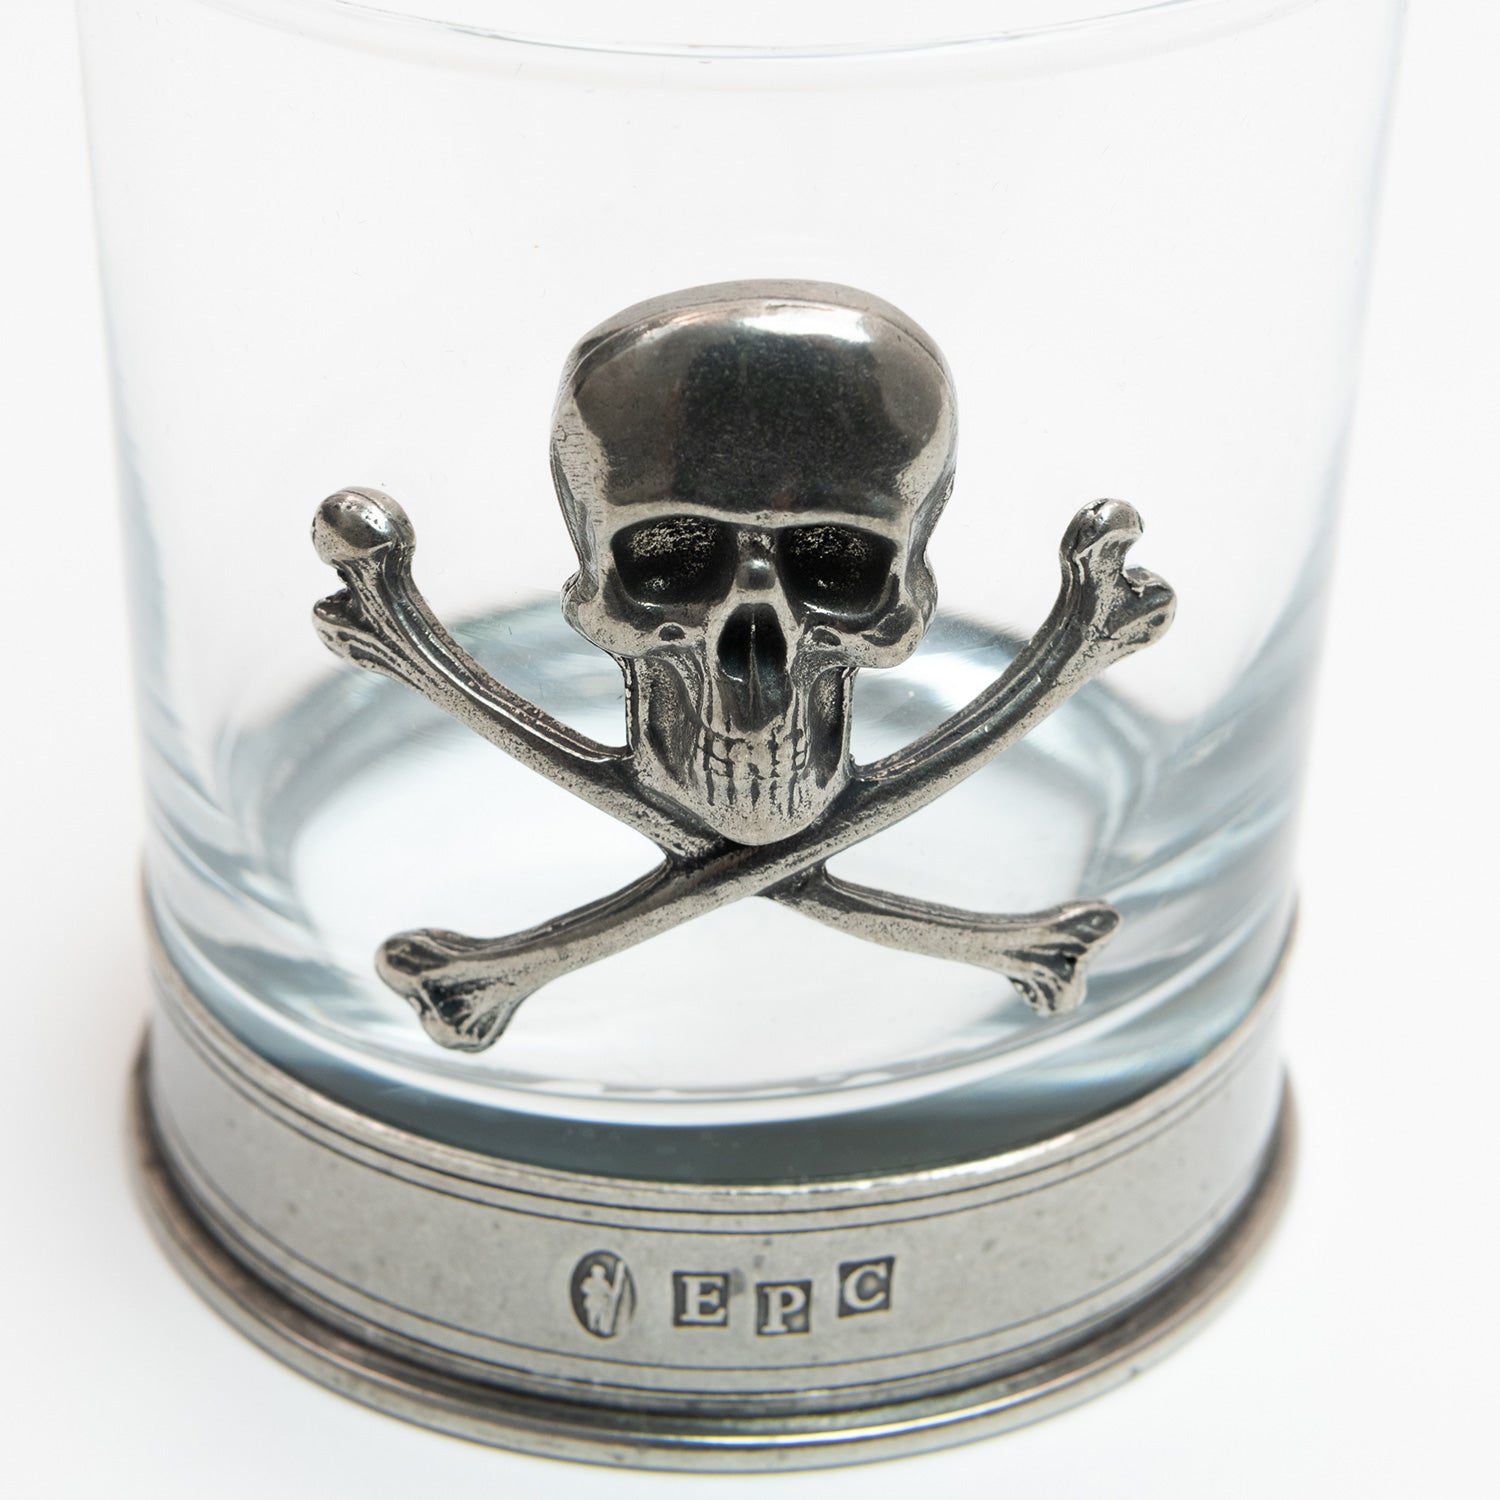 A close-up of the pewter skull and crossbones on the side of the glass.